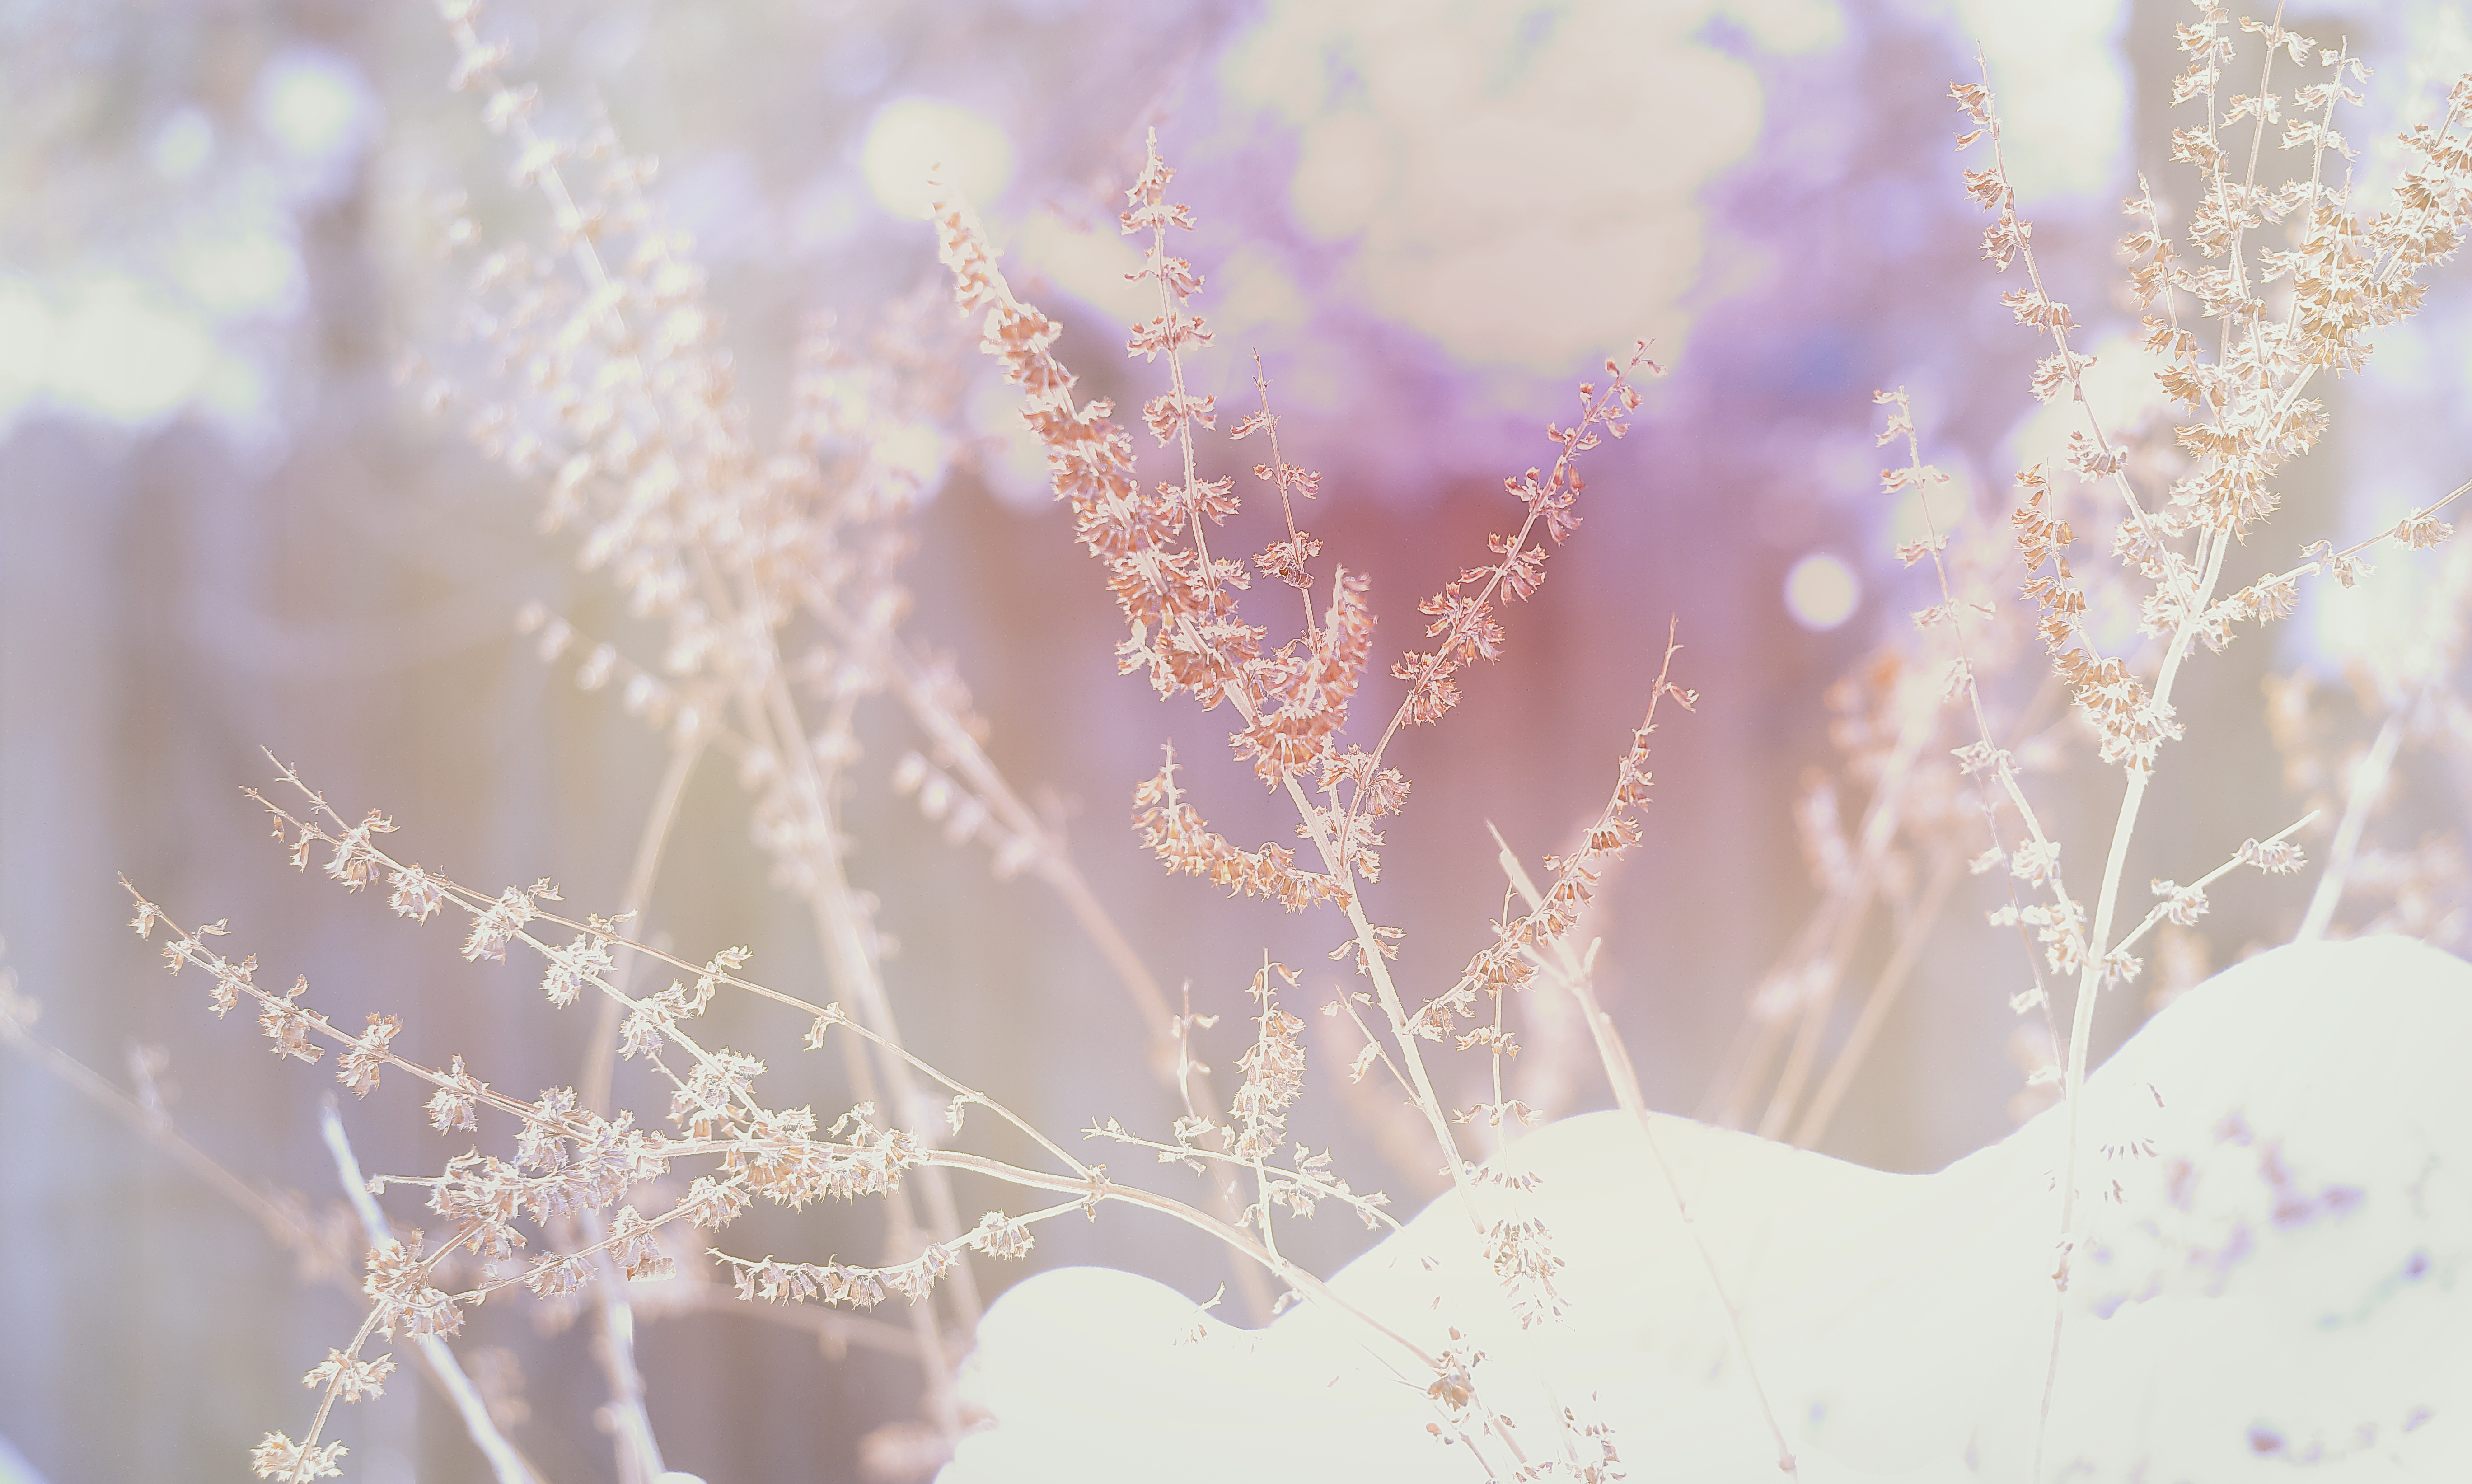 General 5472x3285 winter nature plants depth of field bokeh snow forest bright overexposed closeup